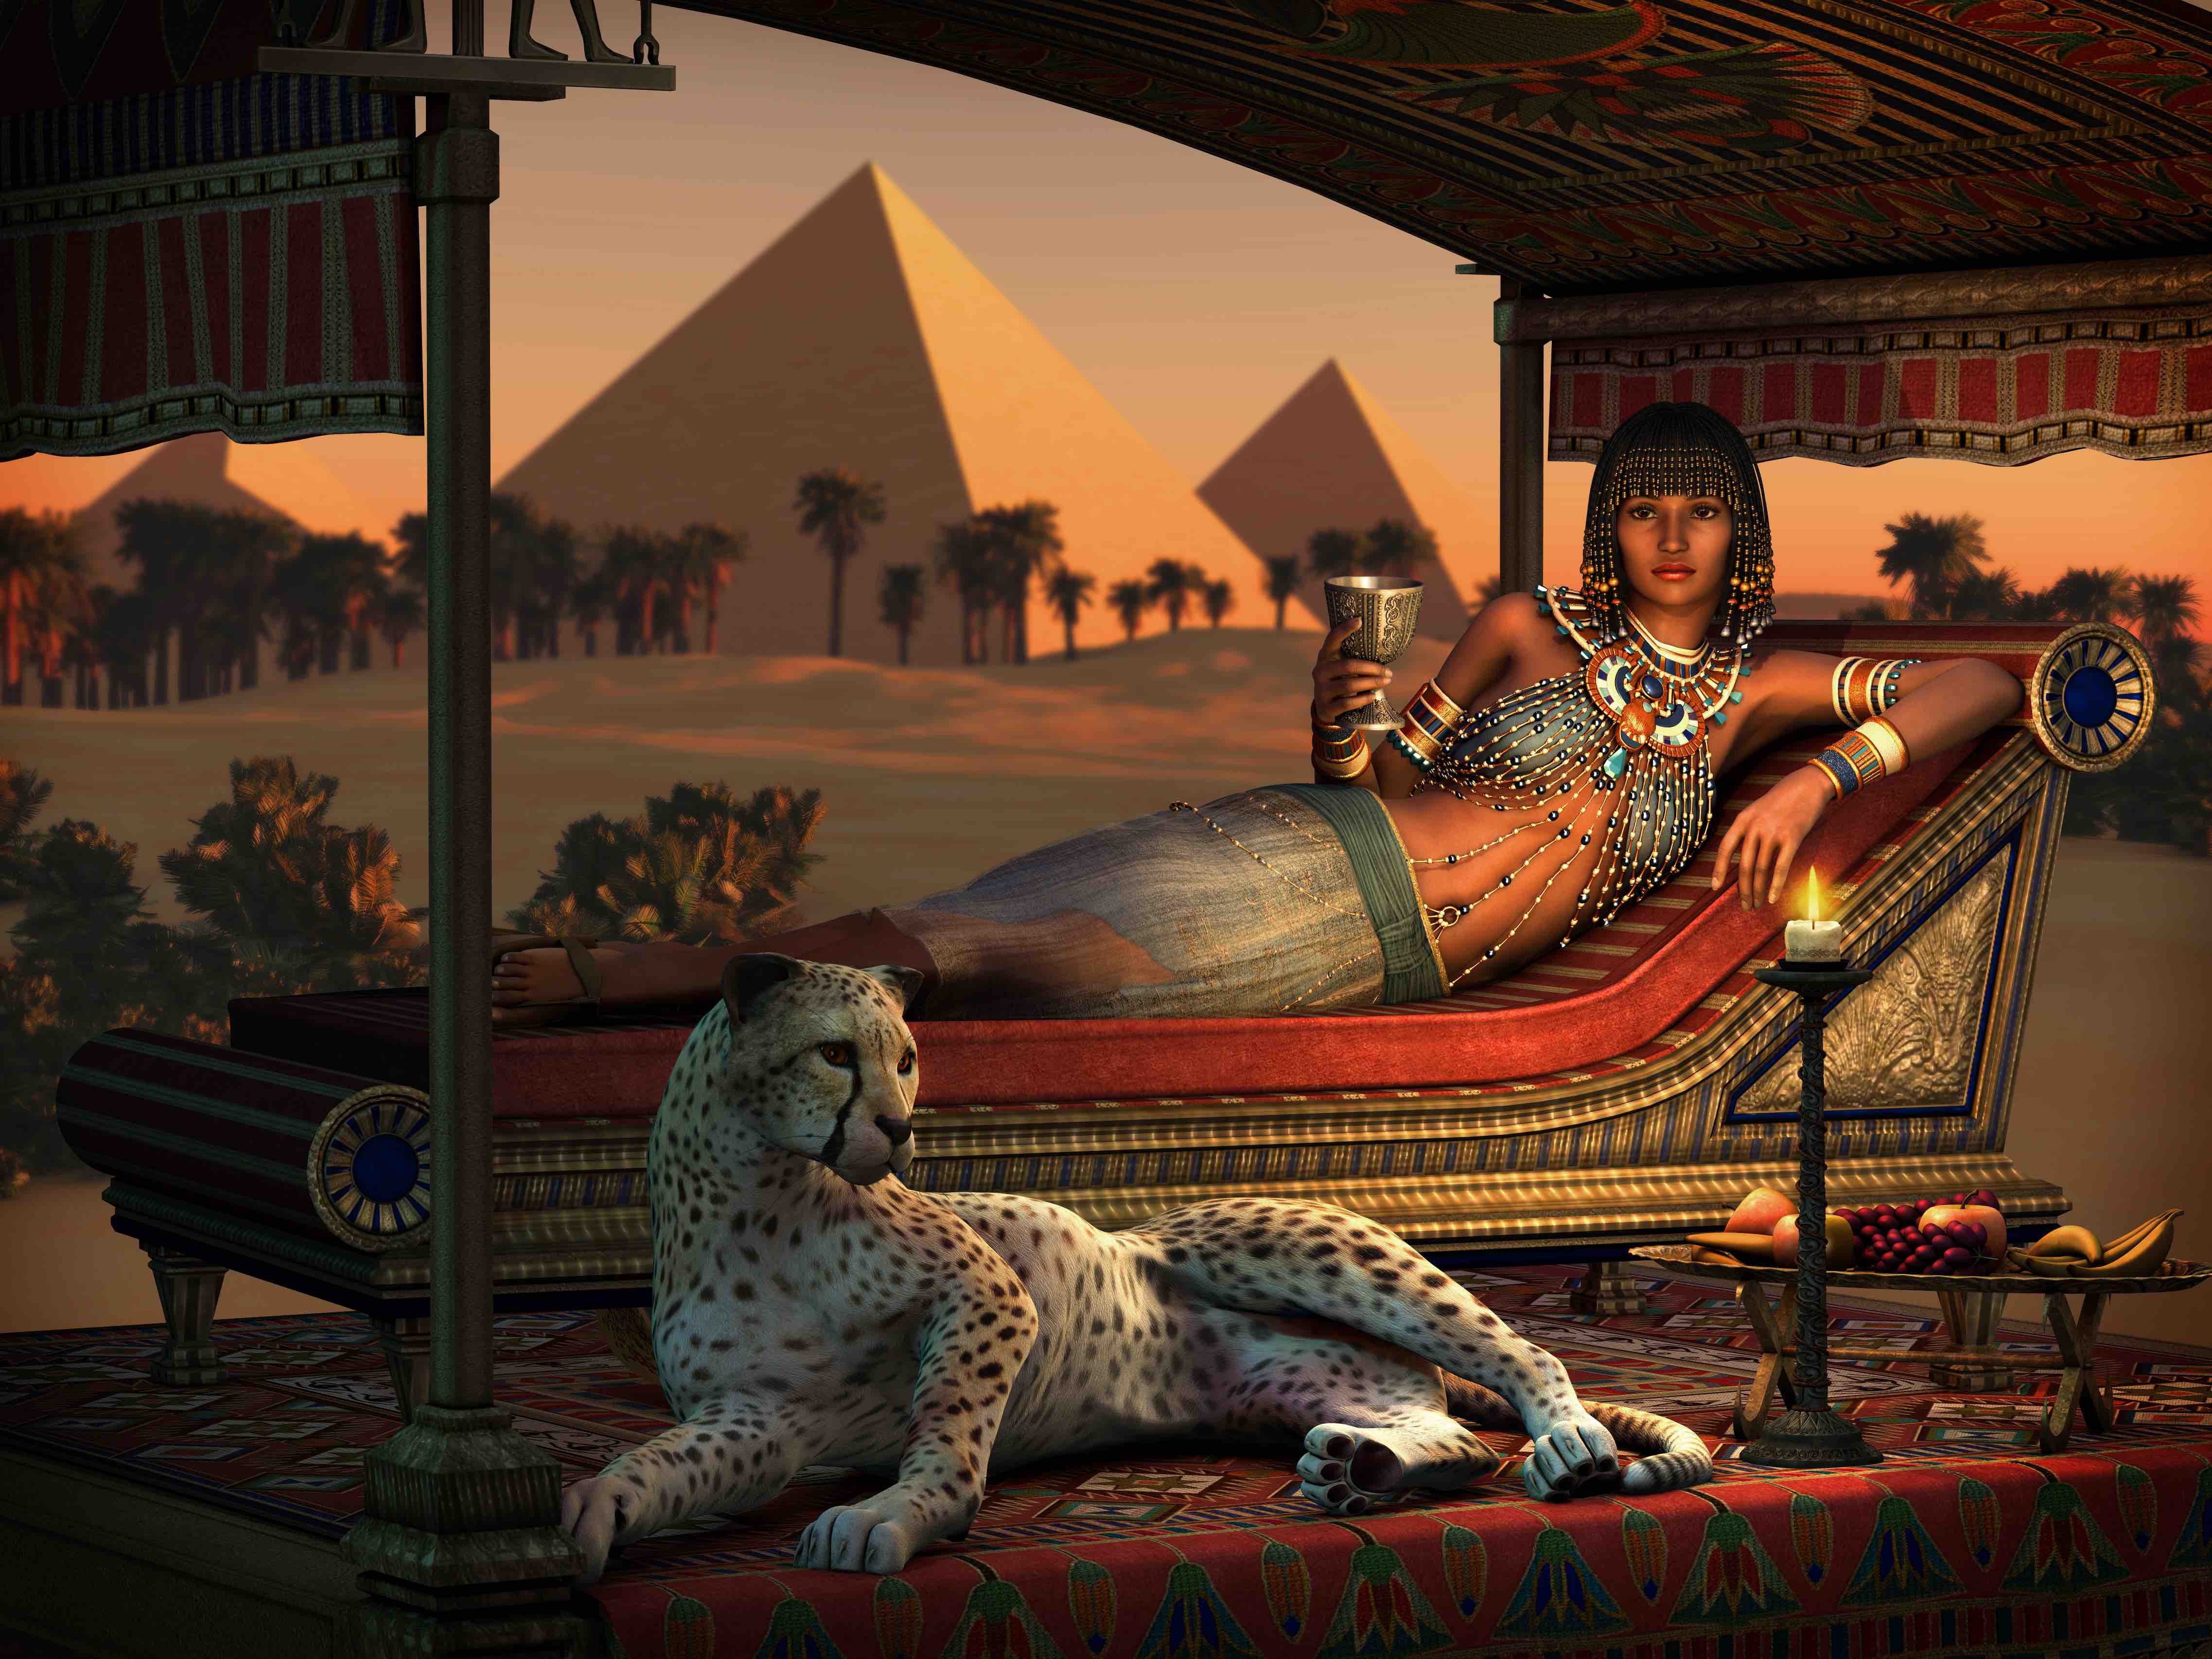 cleopatra, dinner at the pyramids